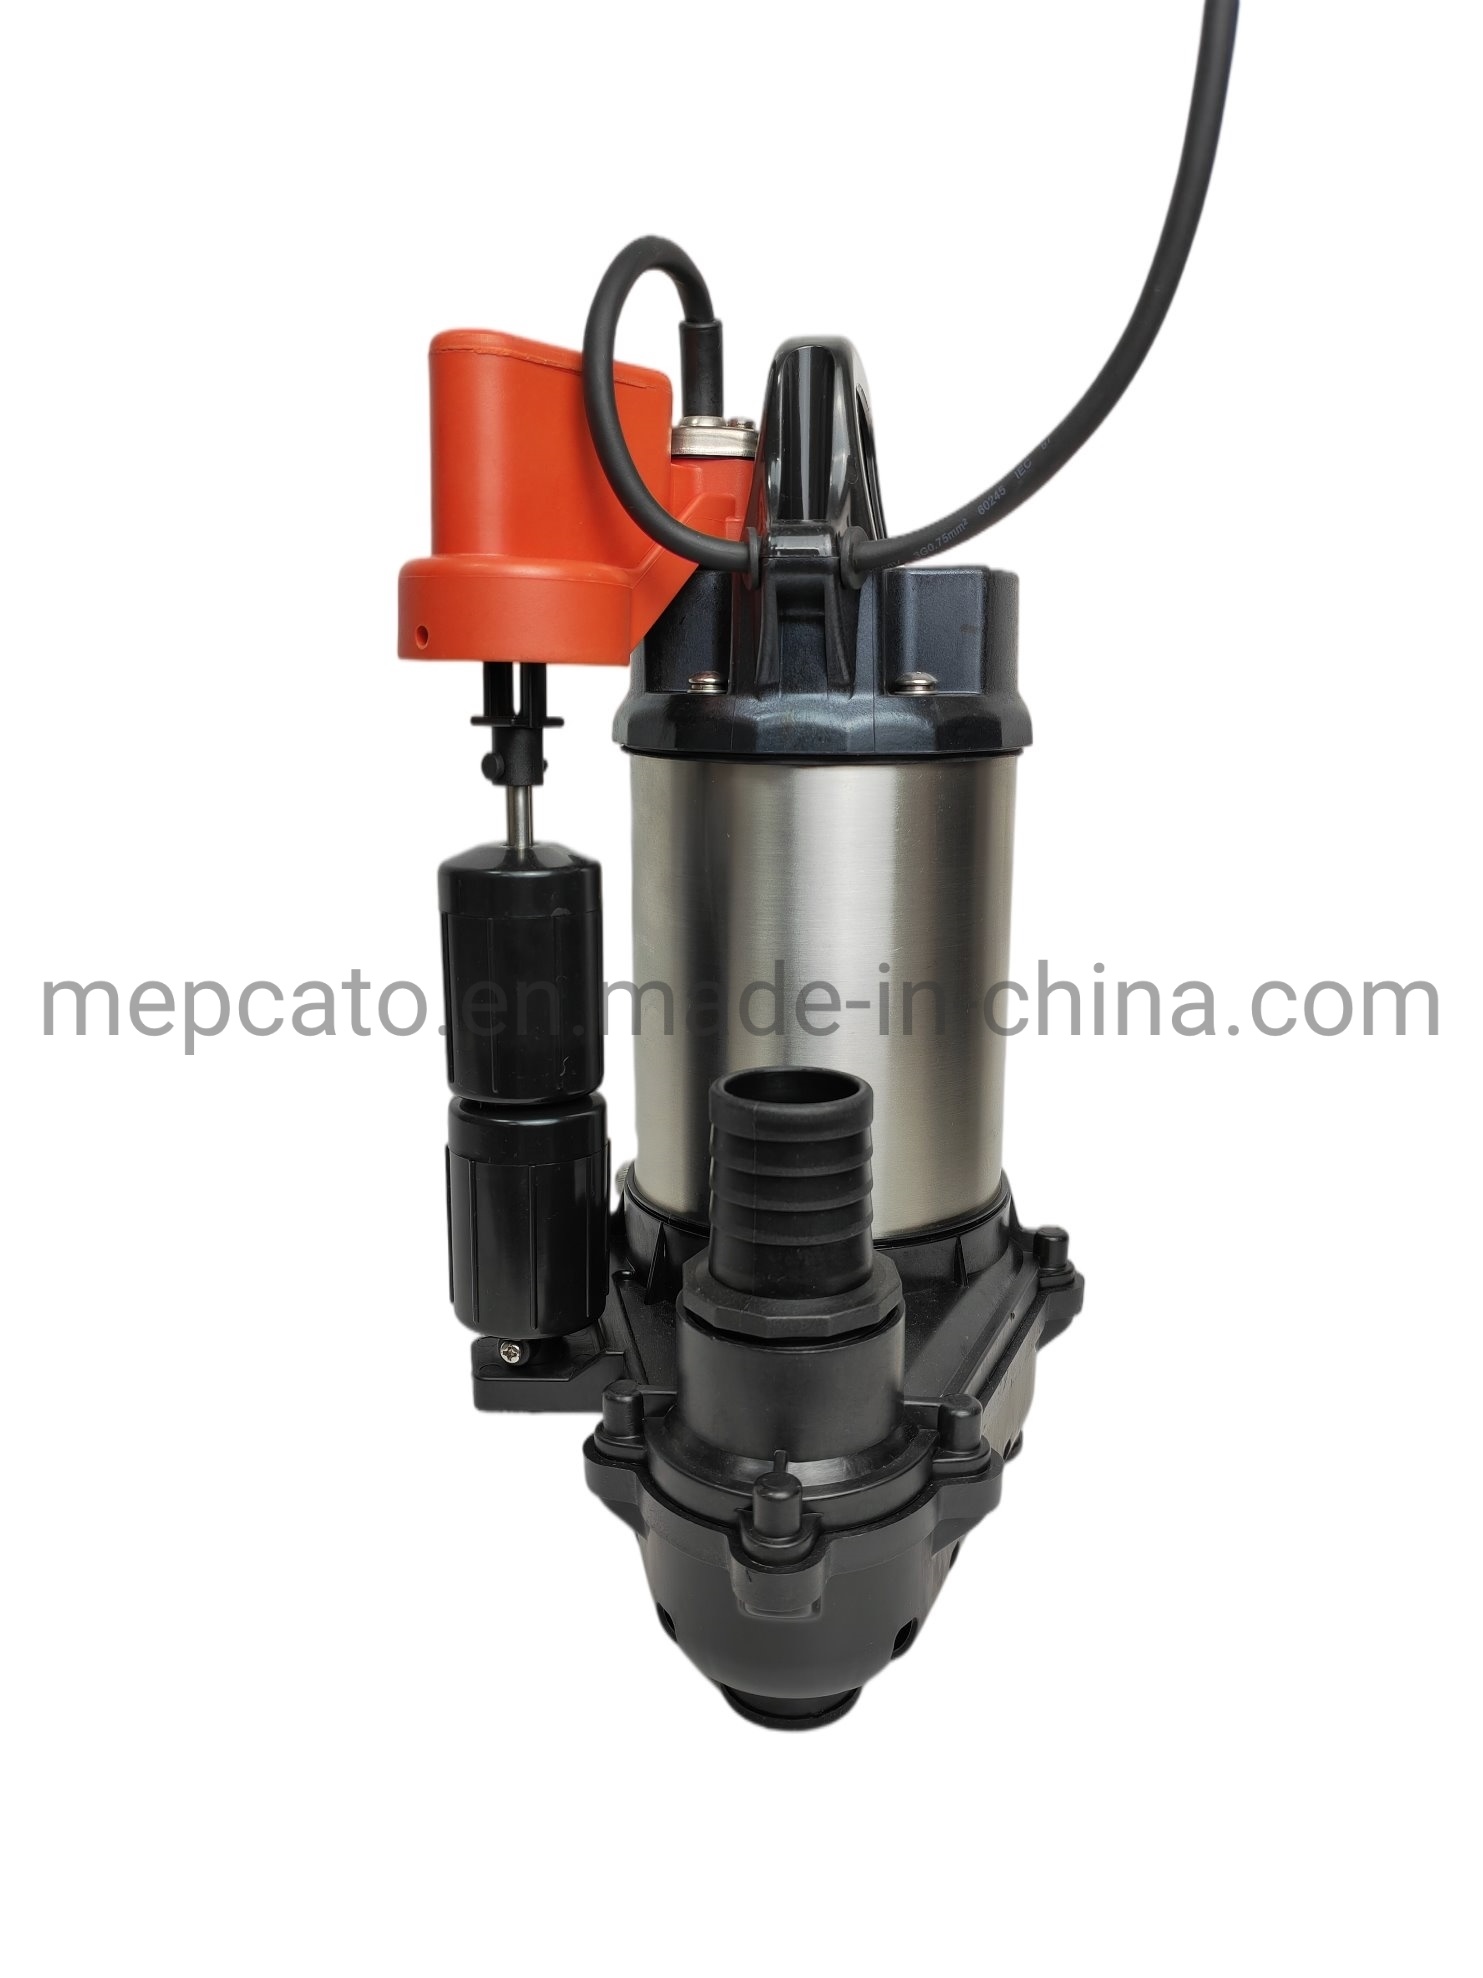 Sea Water Drainage Stainless Steel Electric Submersible Centrifugal Water Supply Pump with Floater for Fishponds Swimming Pools